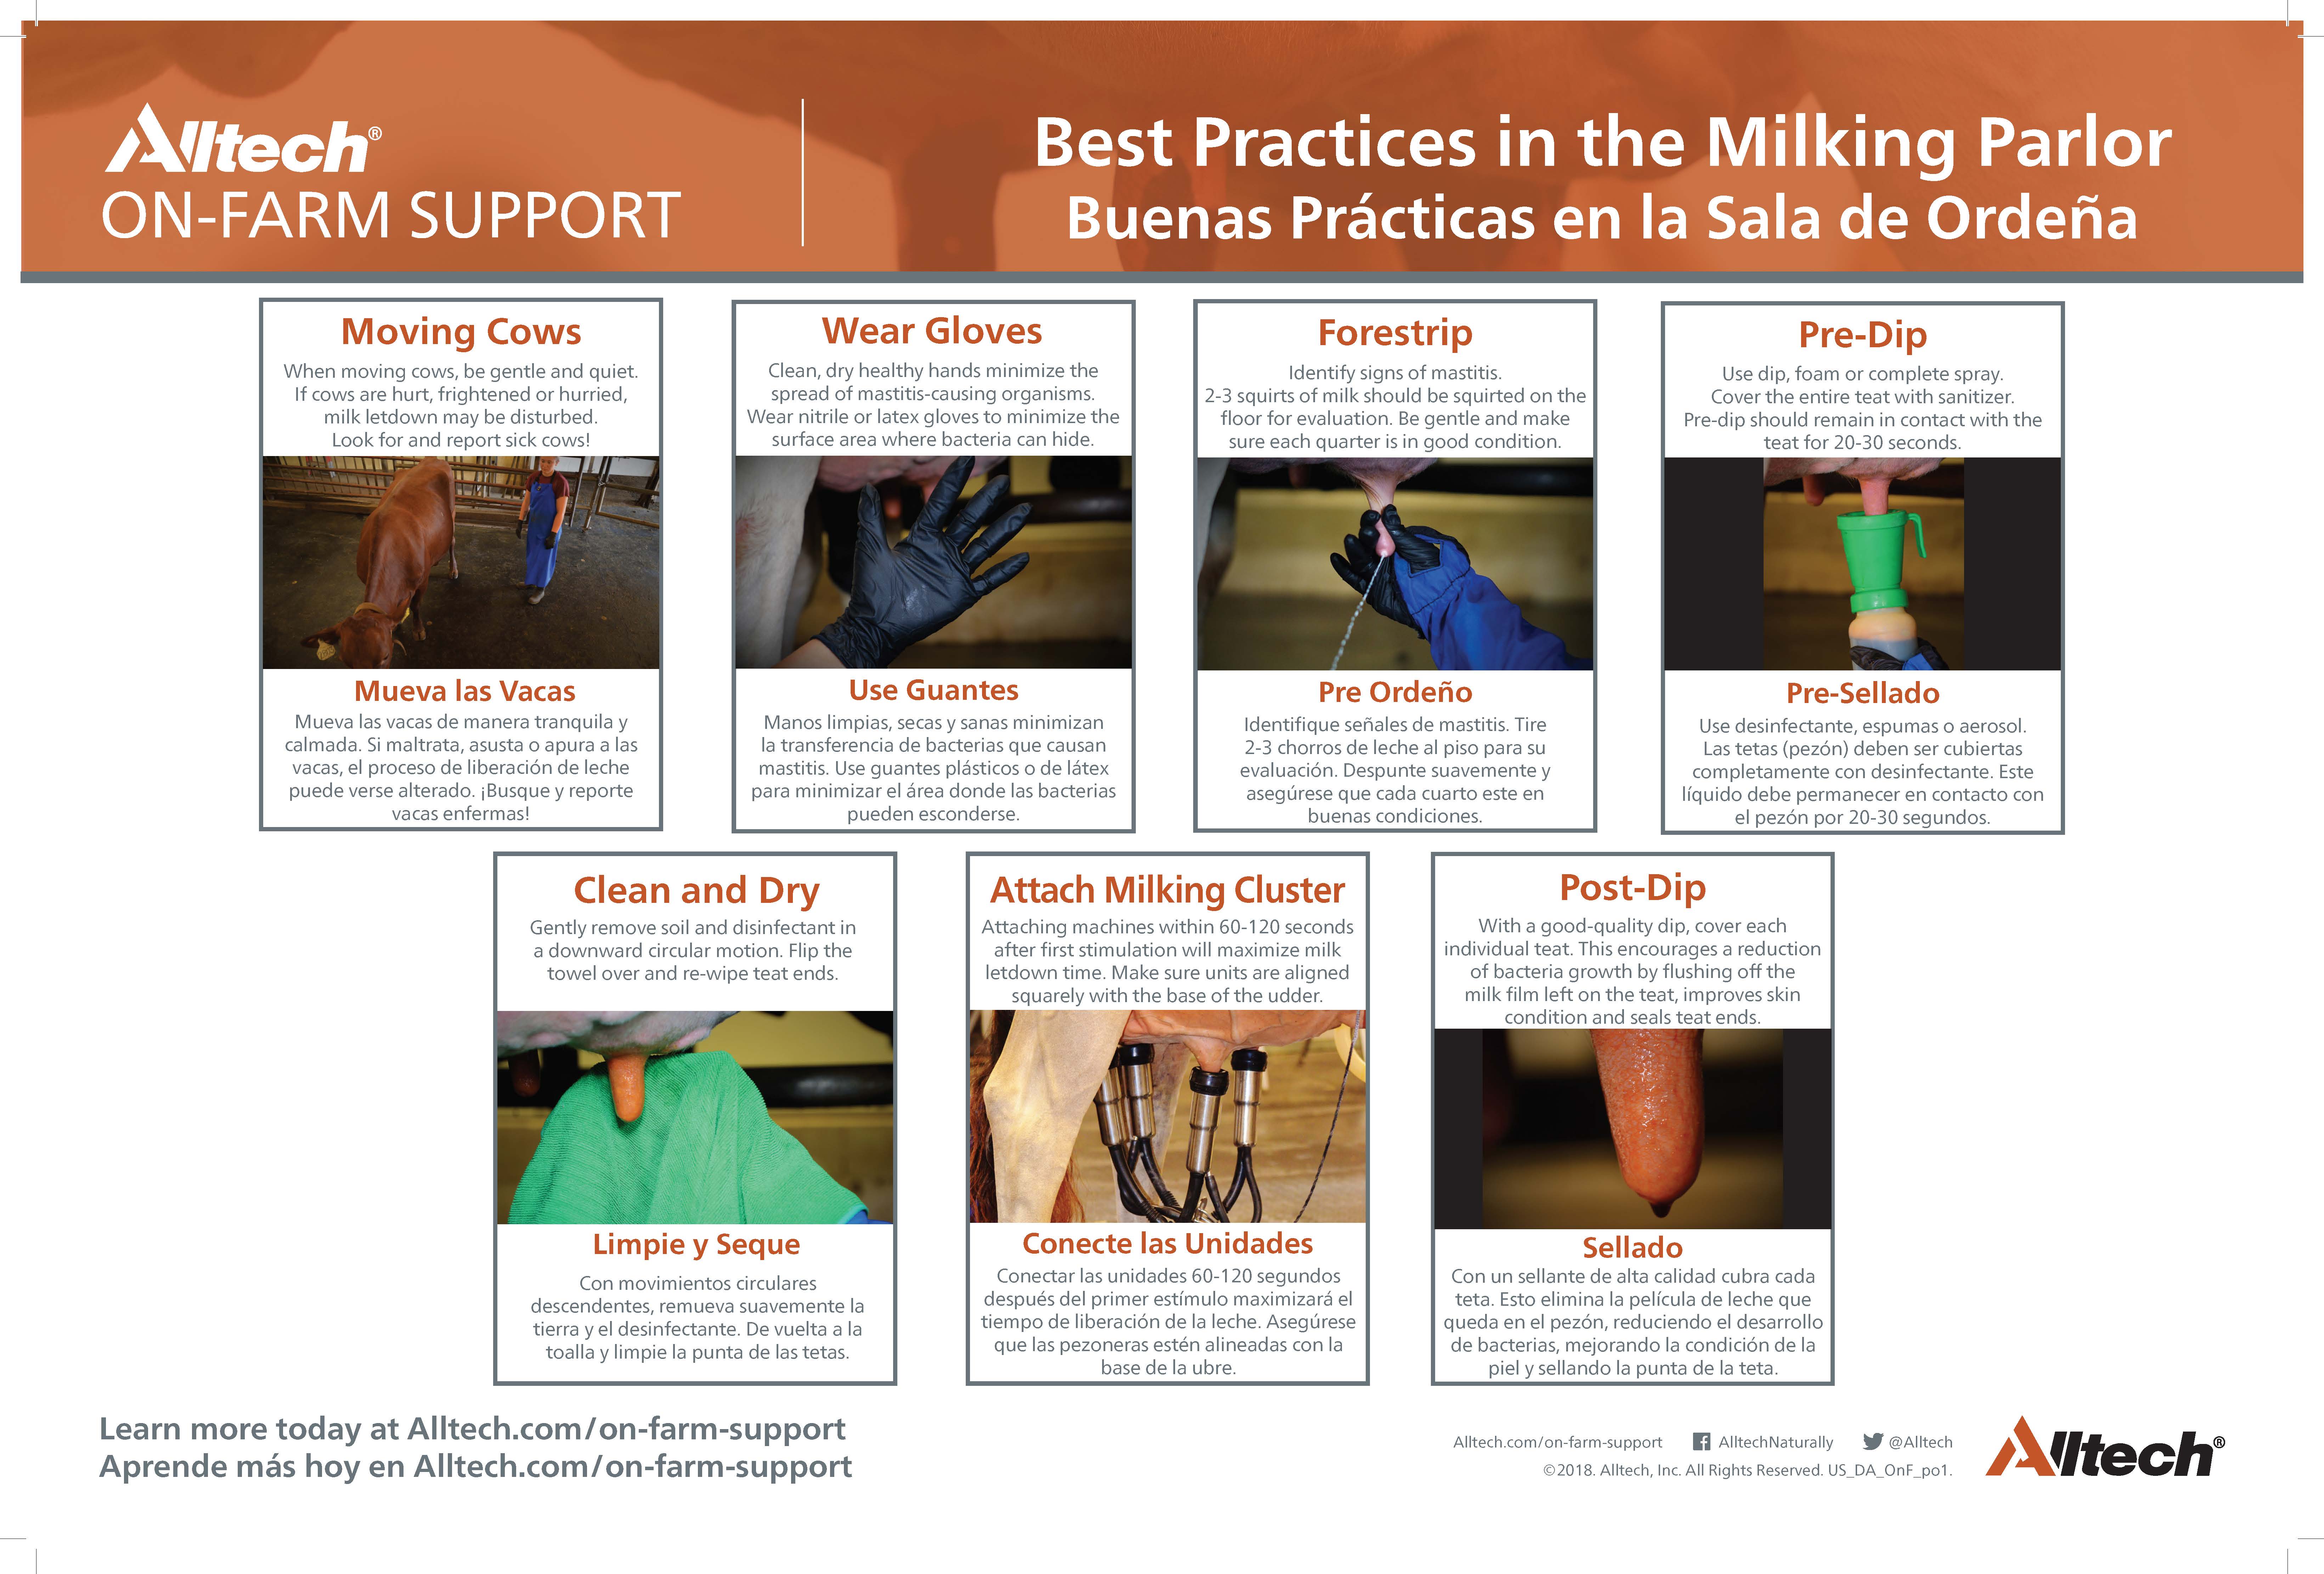 Best Practices in the Milking Parlor (English & Spanish) pdf thumbnail image